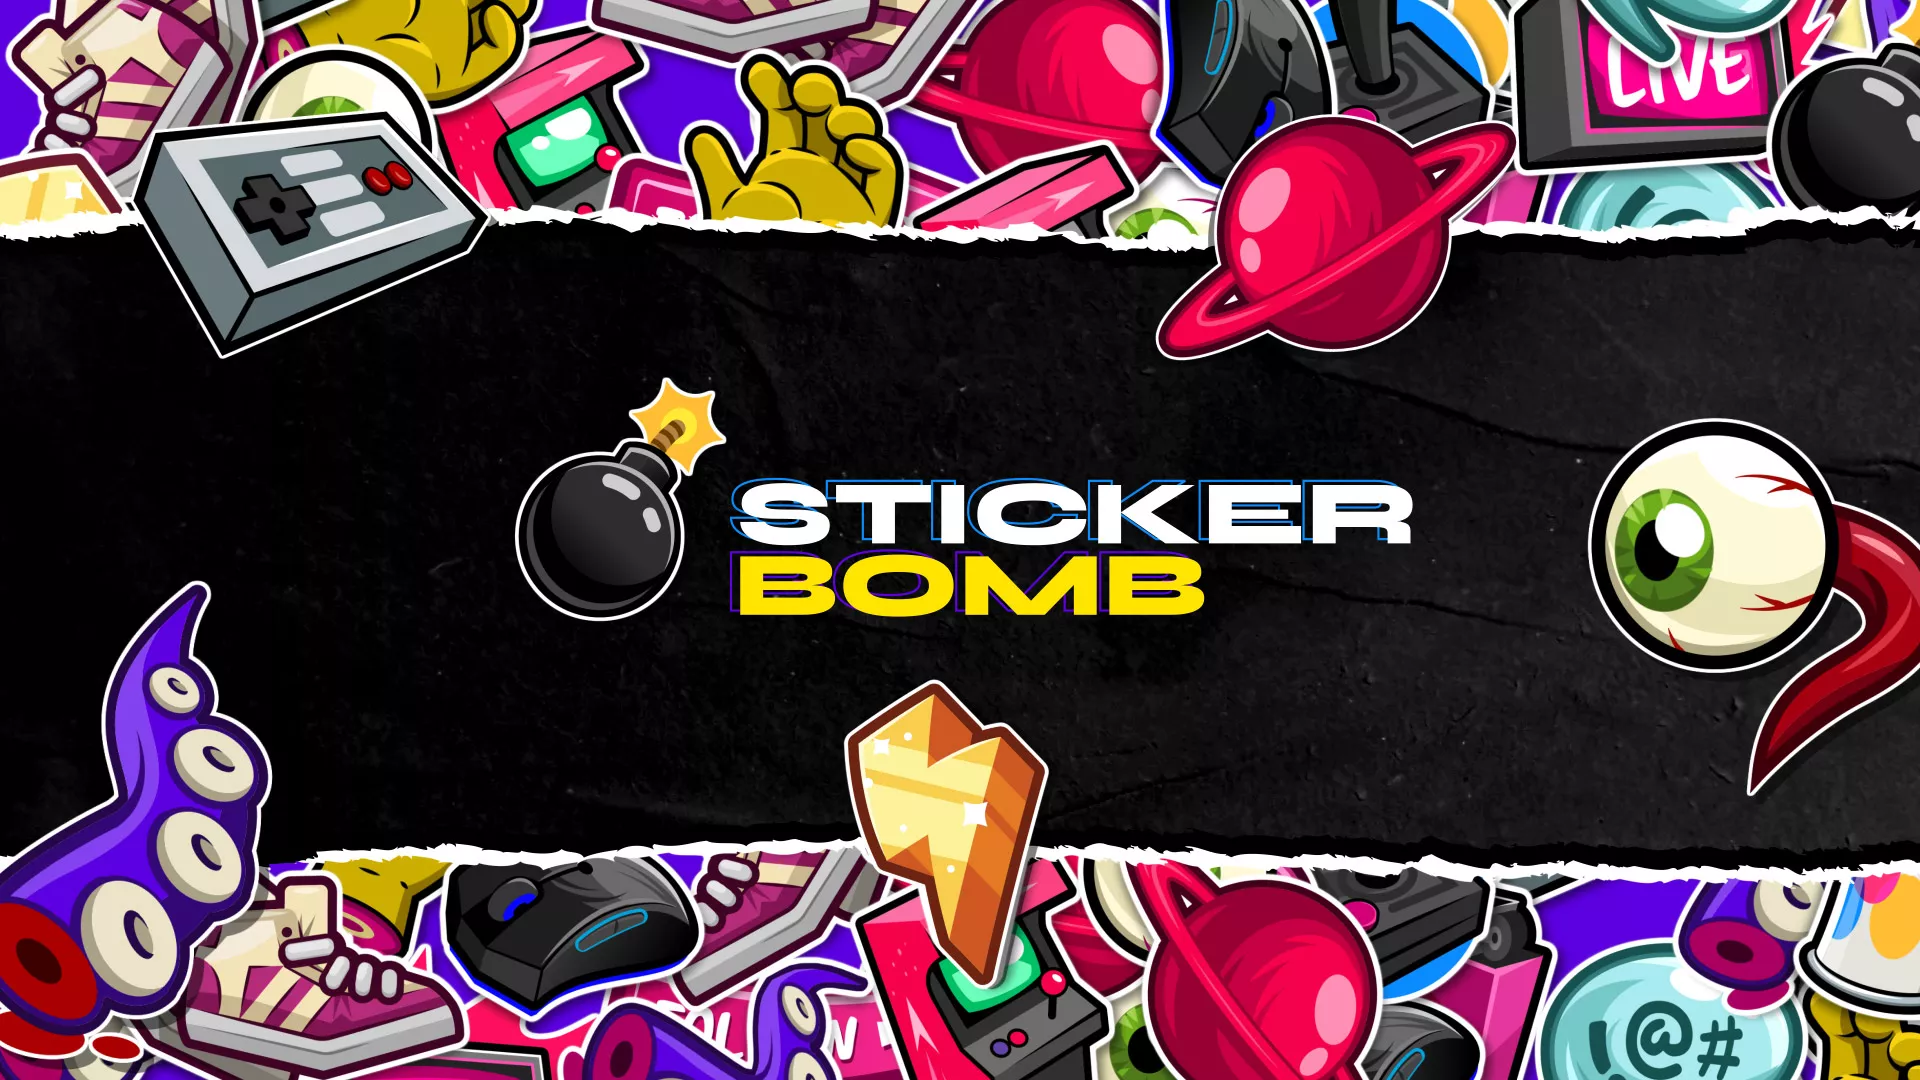 StickerBomb - Stream Package - Main Image